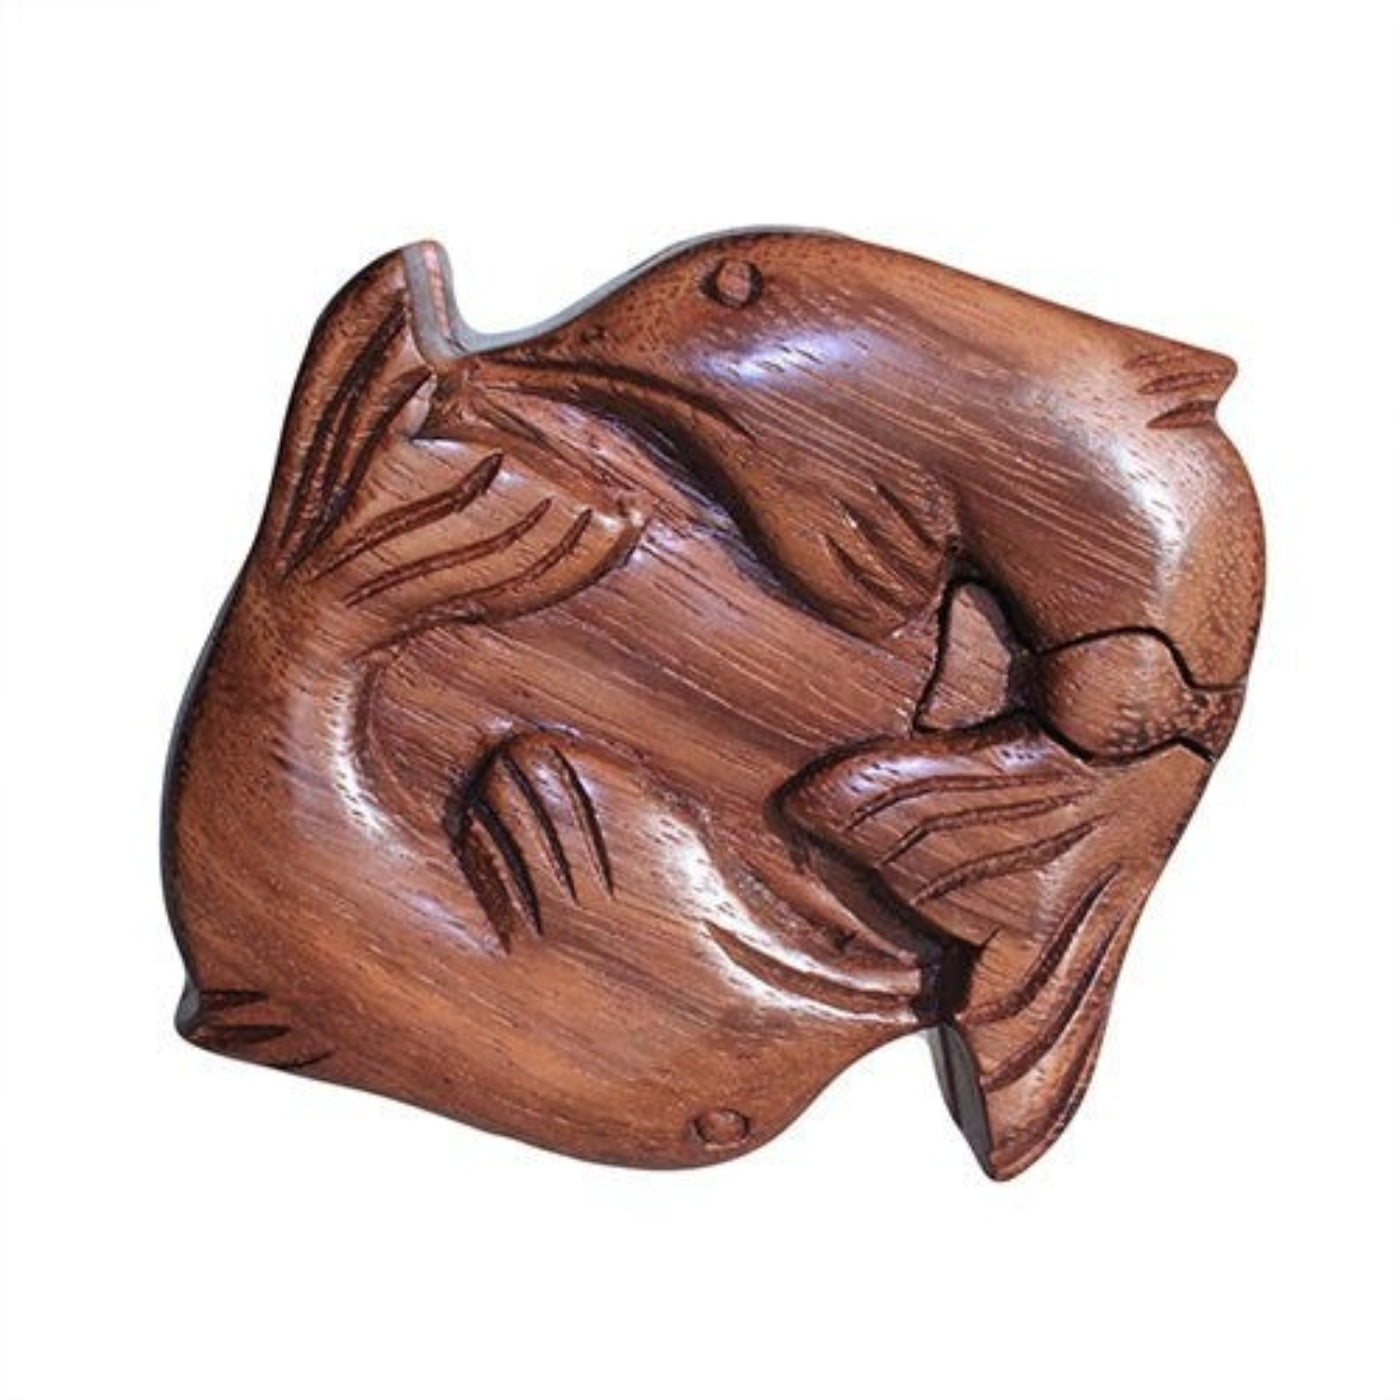 Handmade Dolphins Shaped Wooden Magic Puzzle Storage Box.